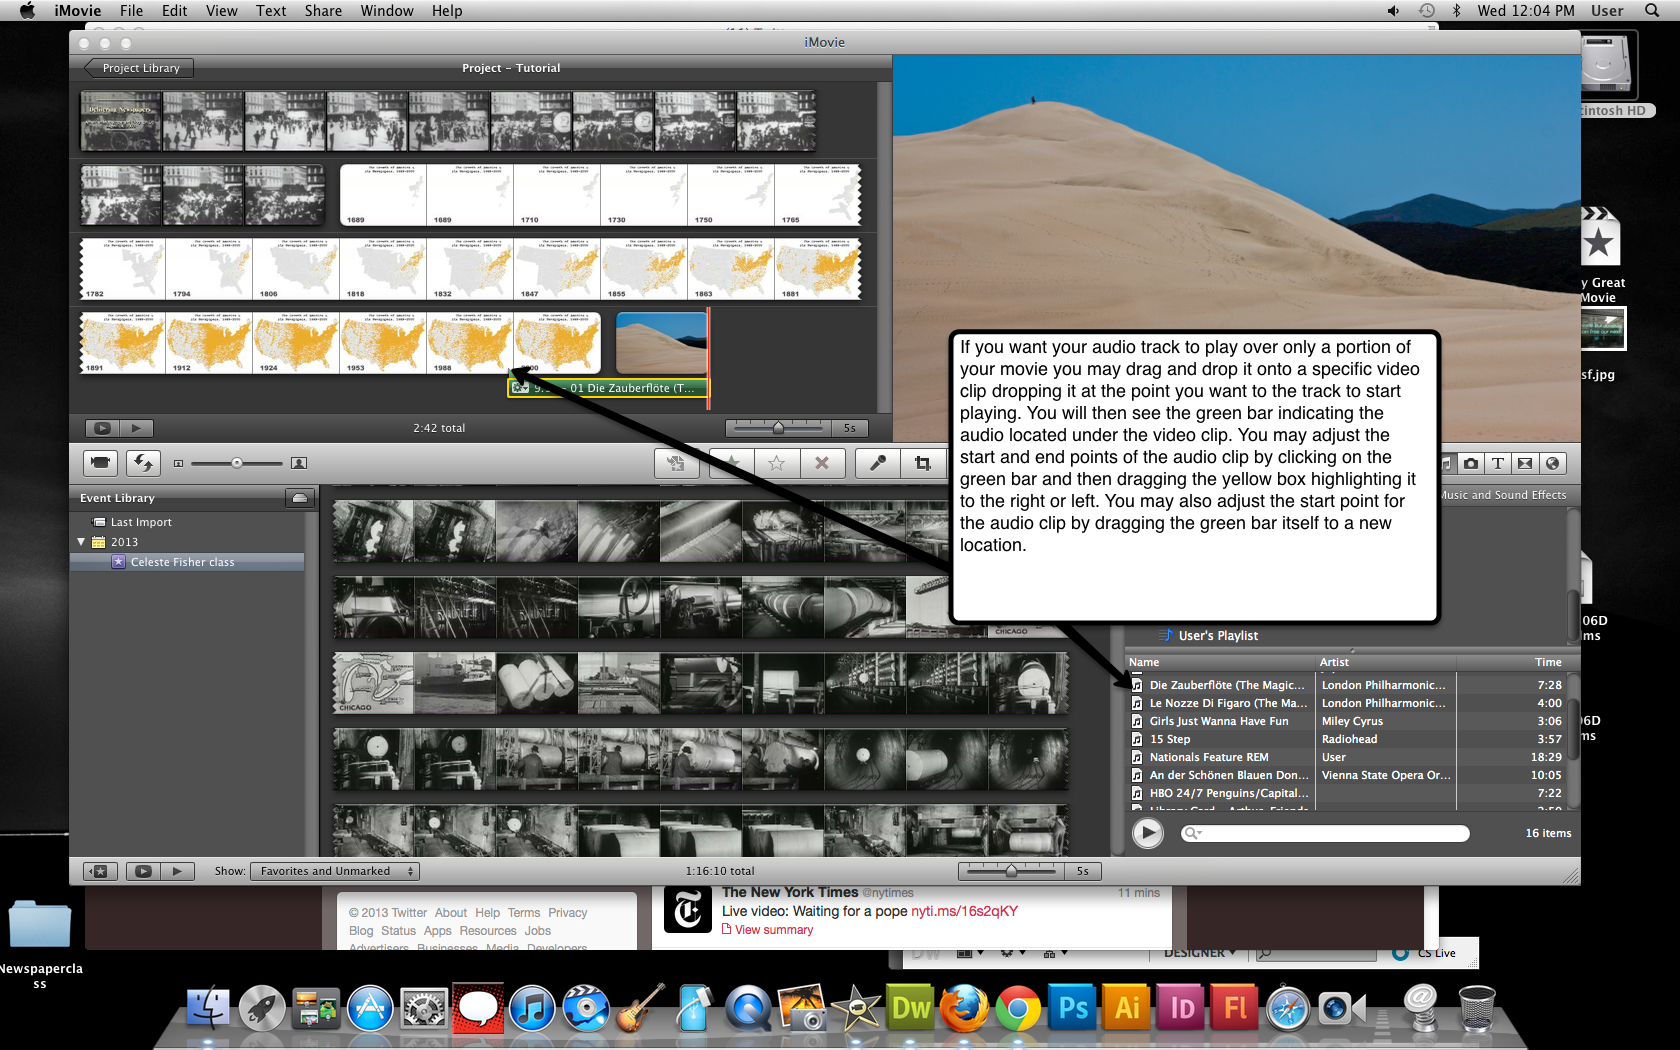 Visual guide on how to add audio in iMovie '11